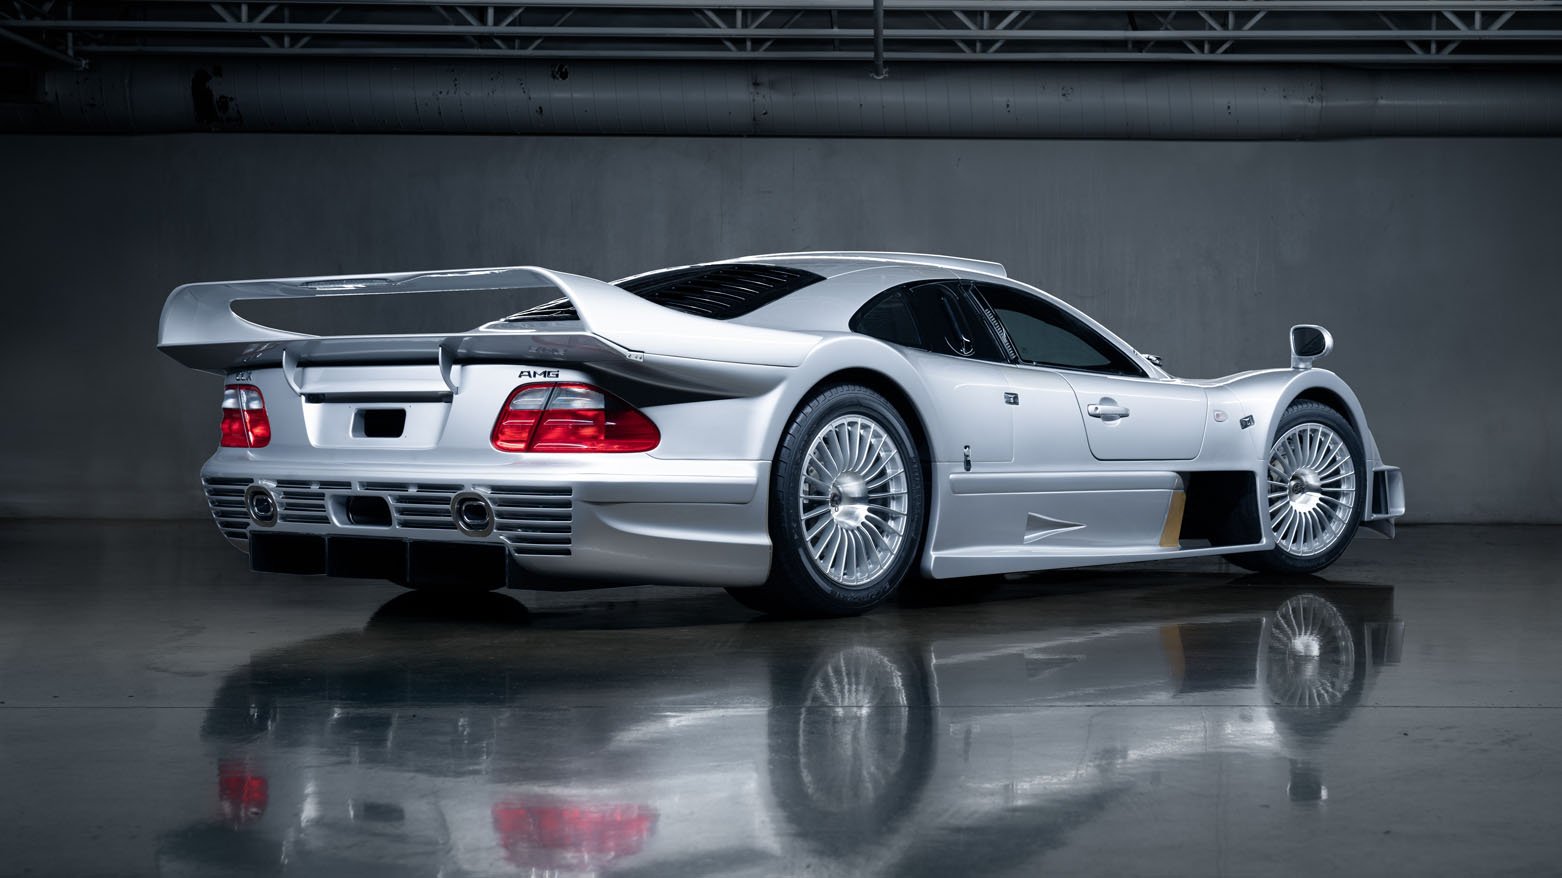 Feast your eyes upon this $10,000,000 Mercedes